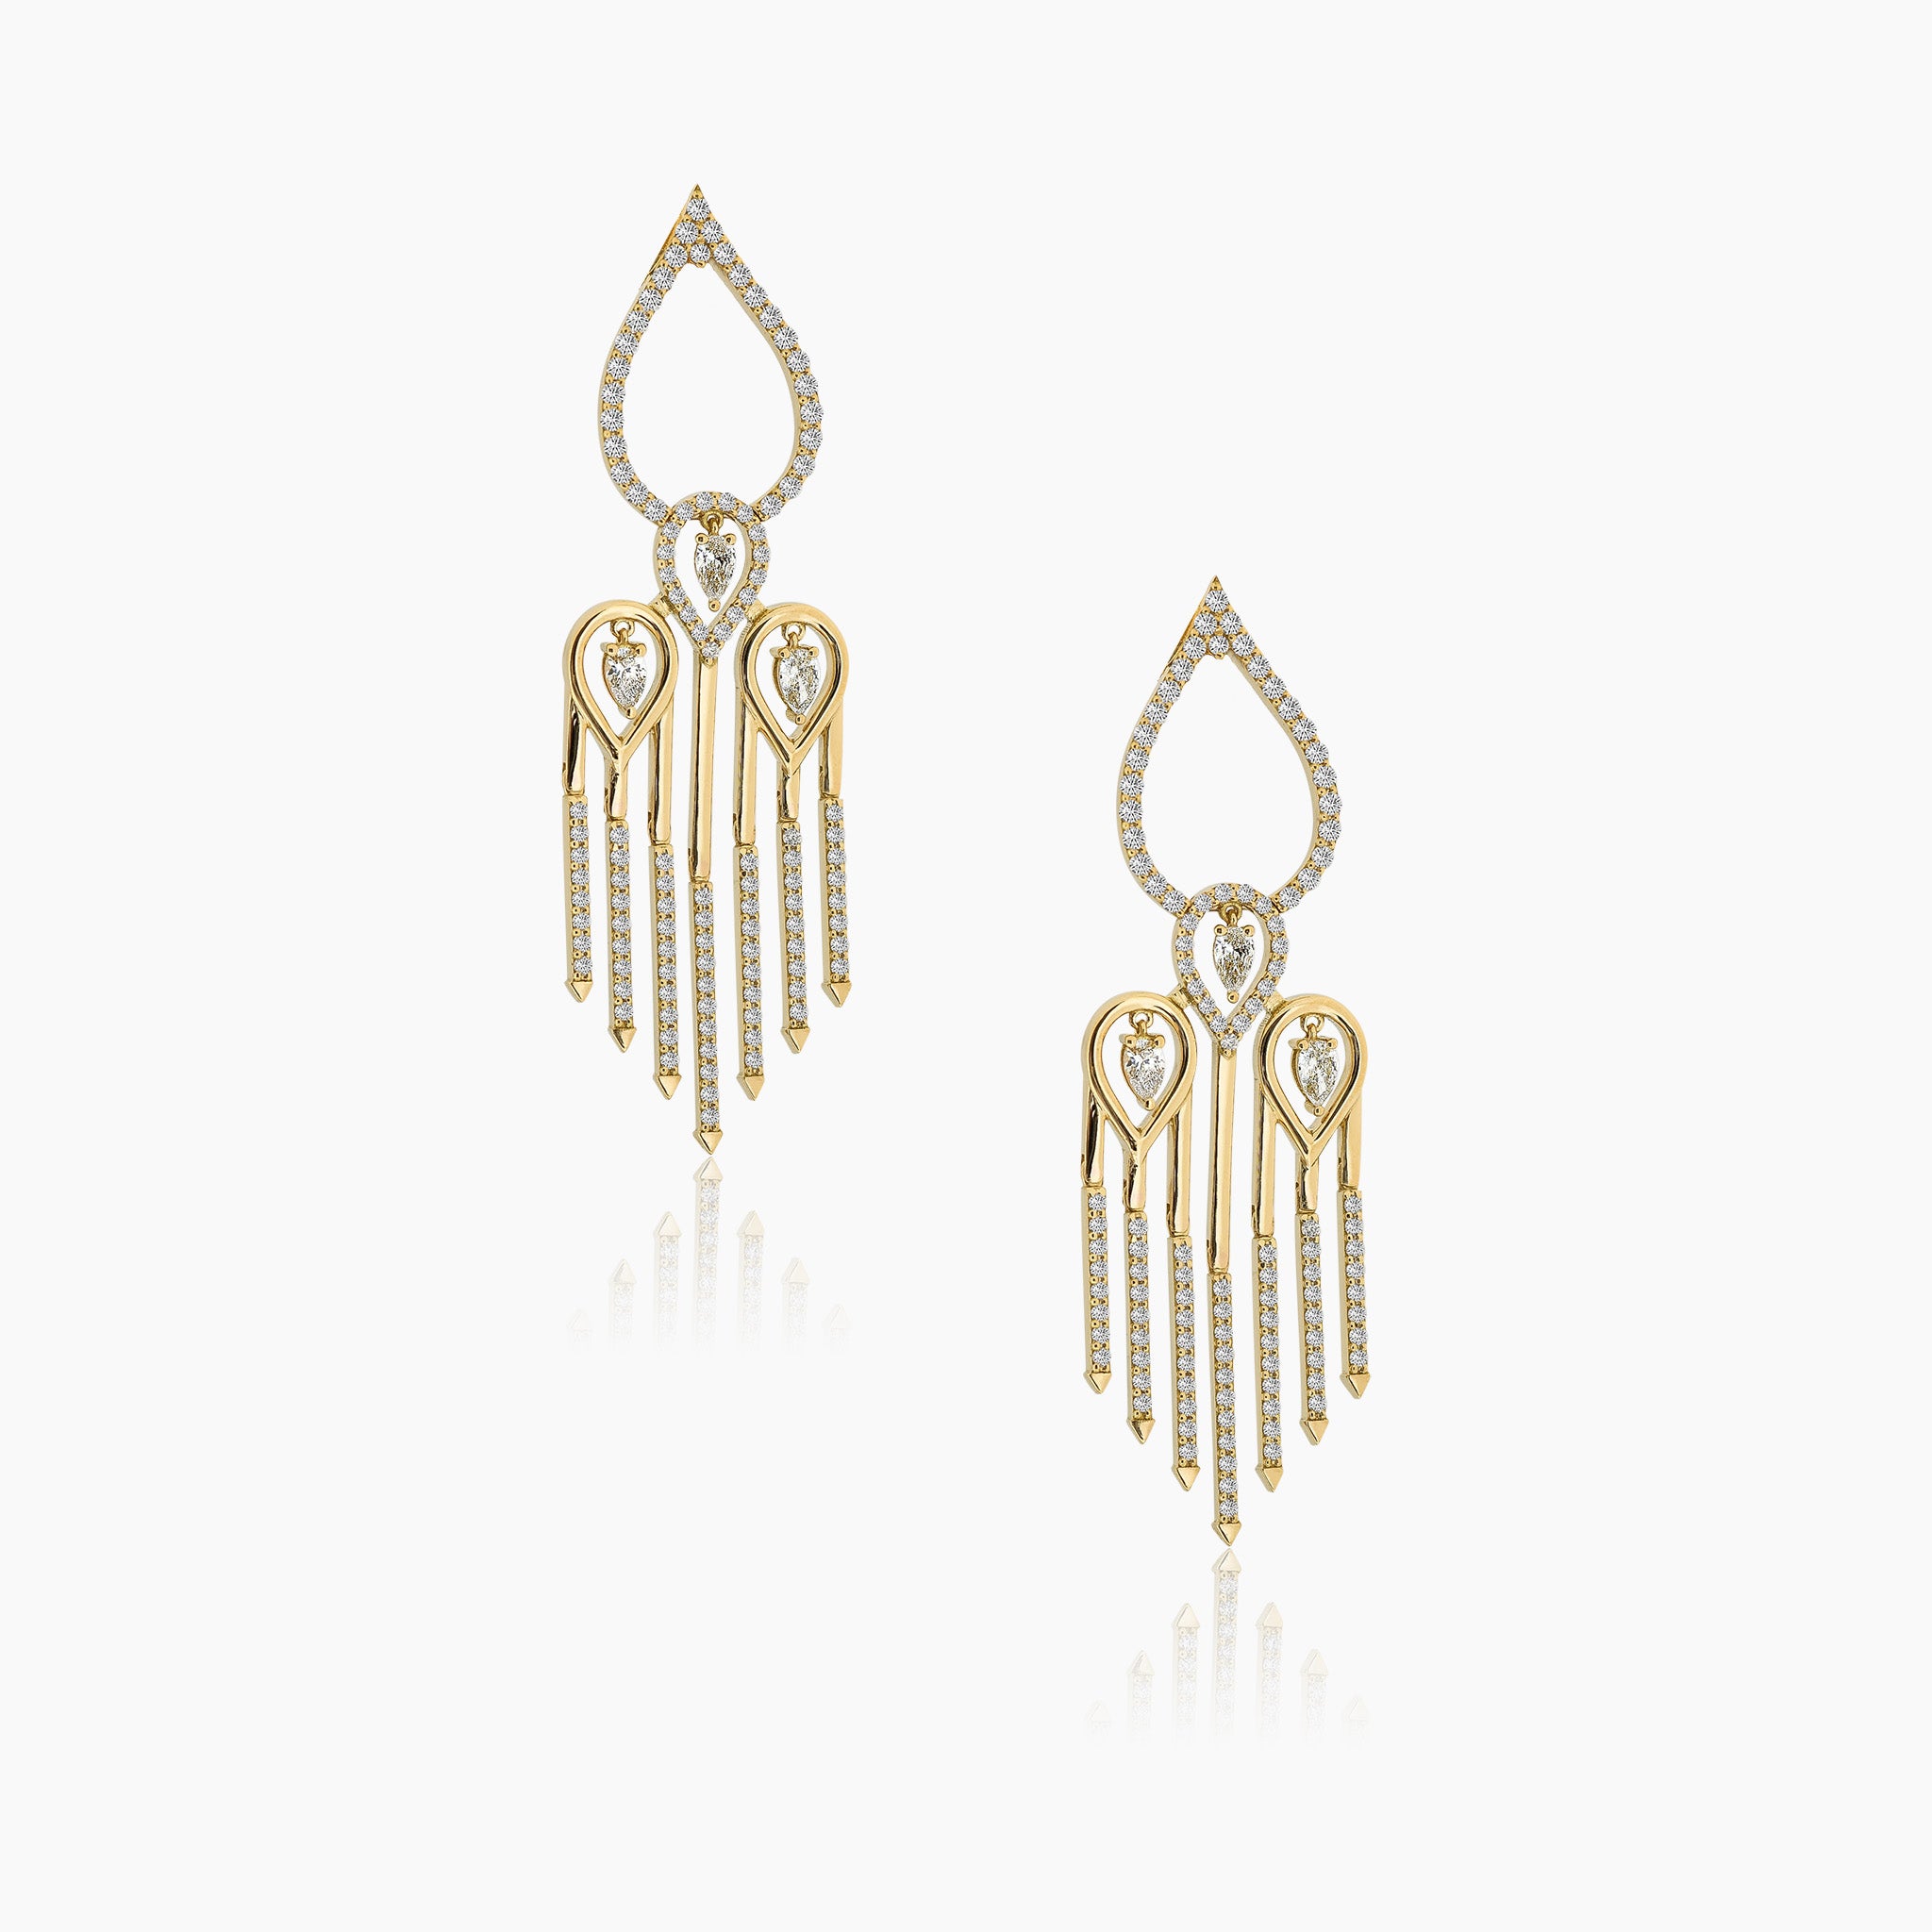 Sahara yellow gold earrings adorned with white diamonds, displayed against an off-white background.